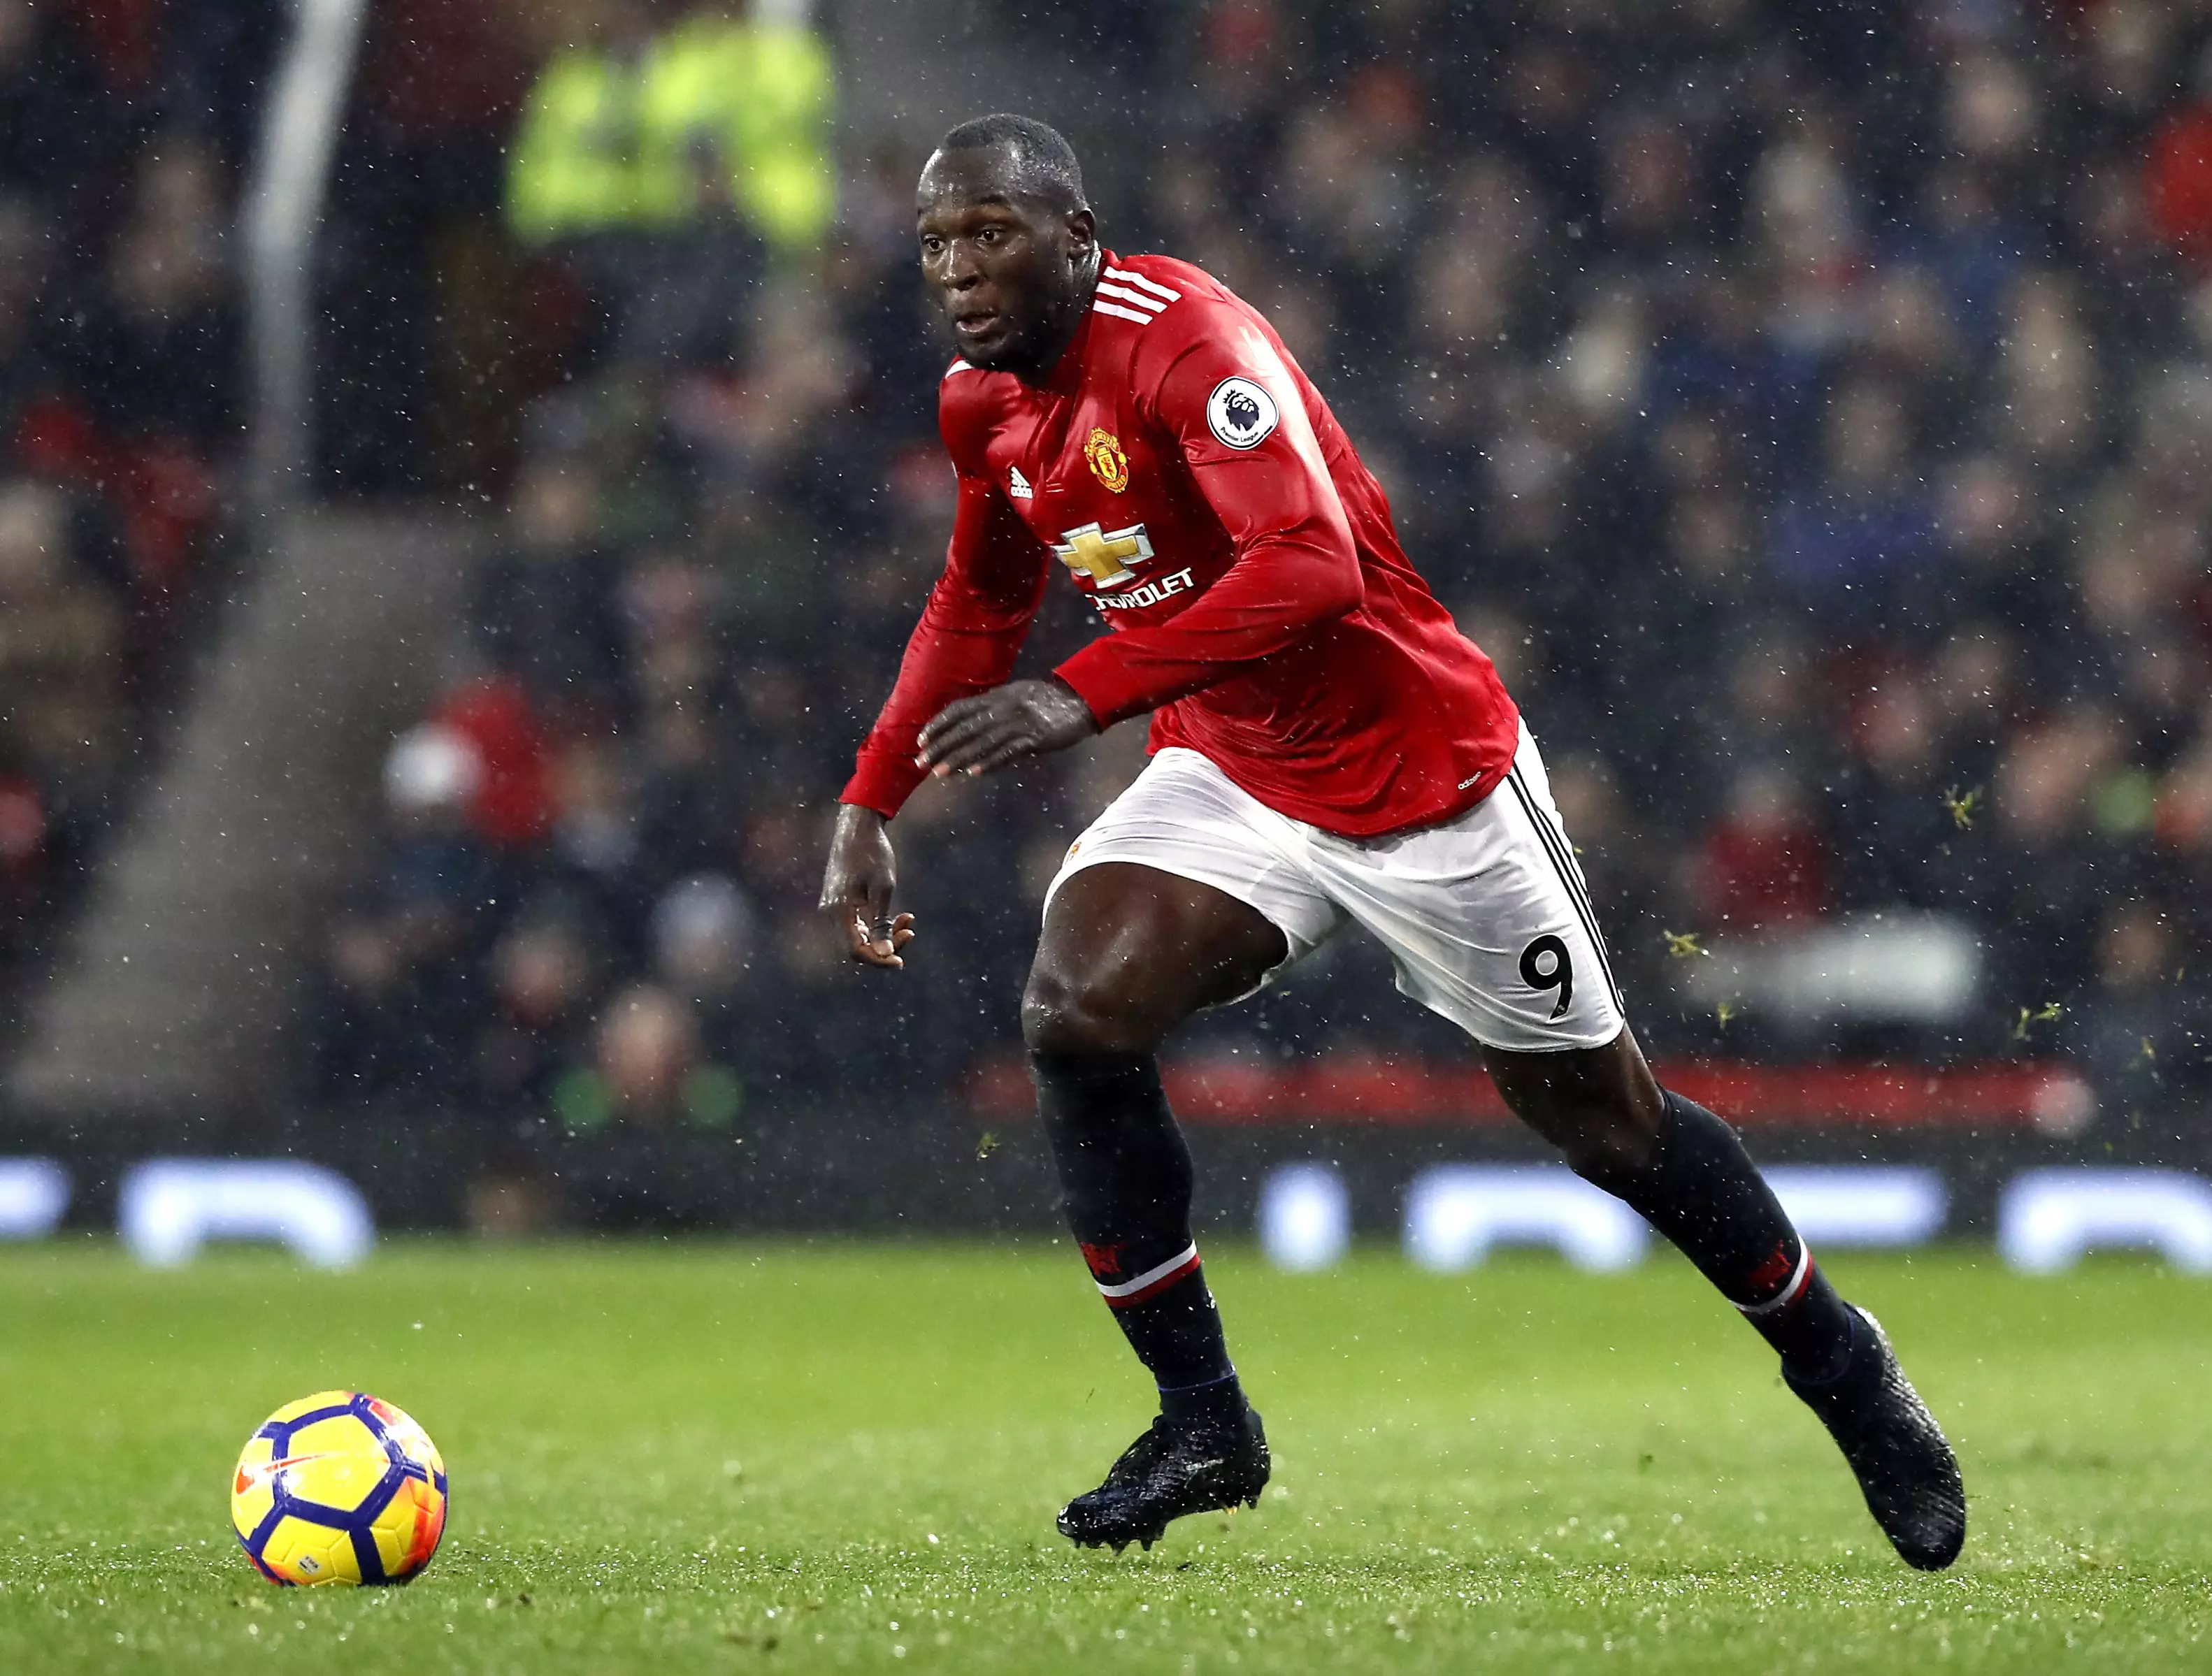 Lukaku in action for United. Image: PA